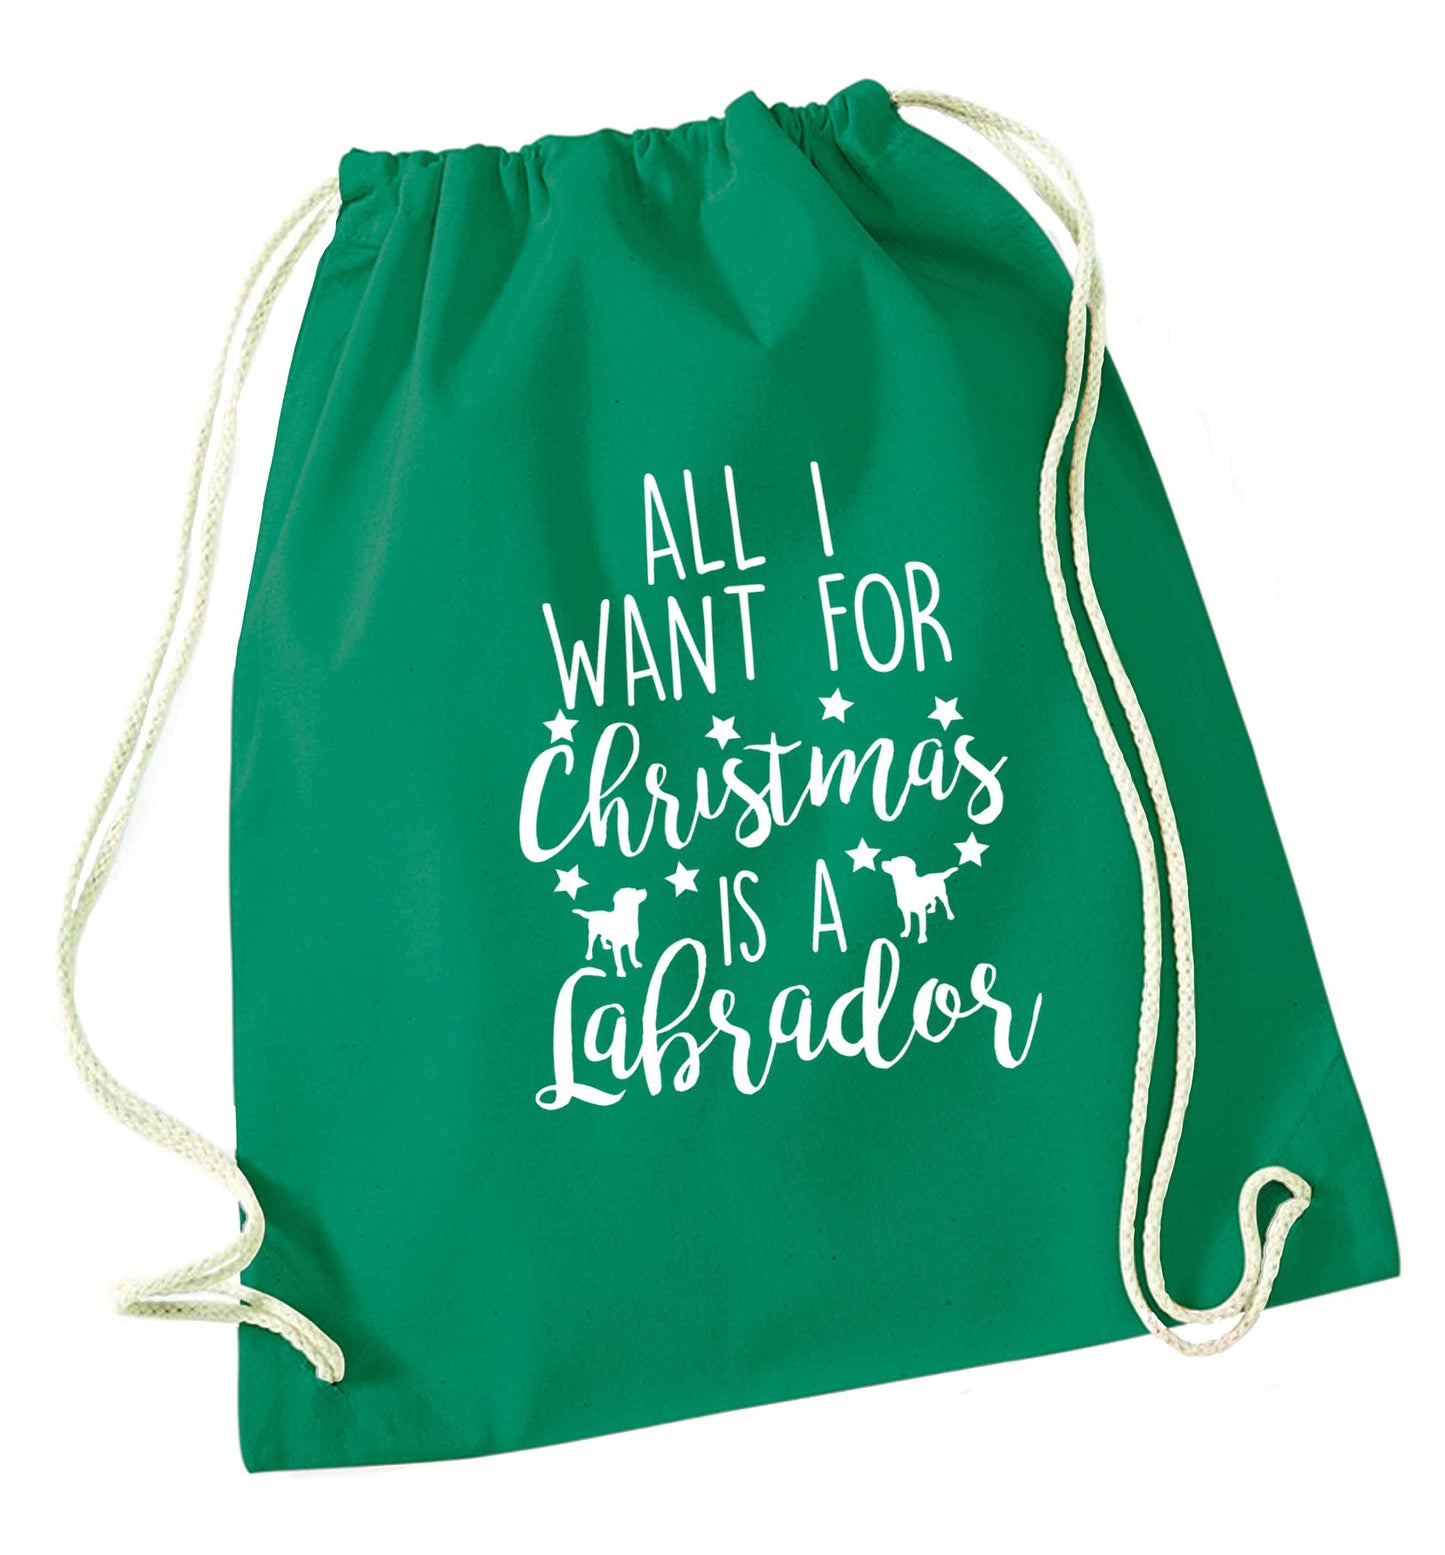 All I want for Christmas is a labrador green drawstring bag